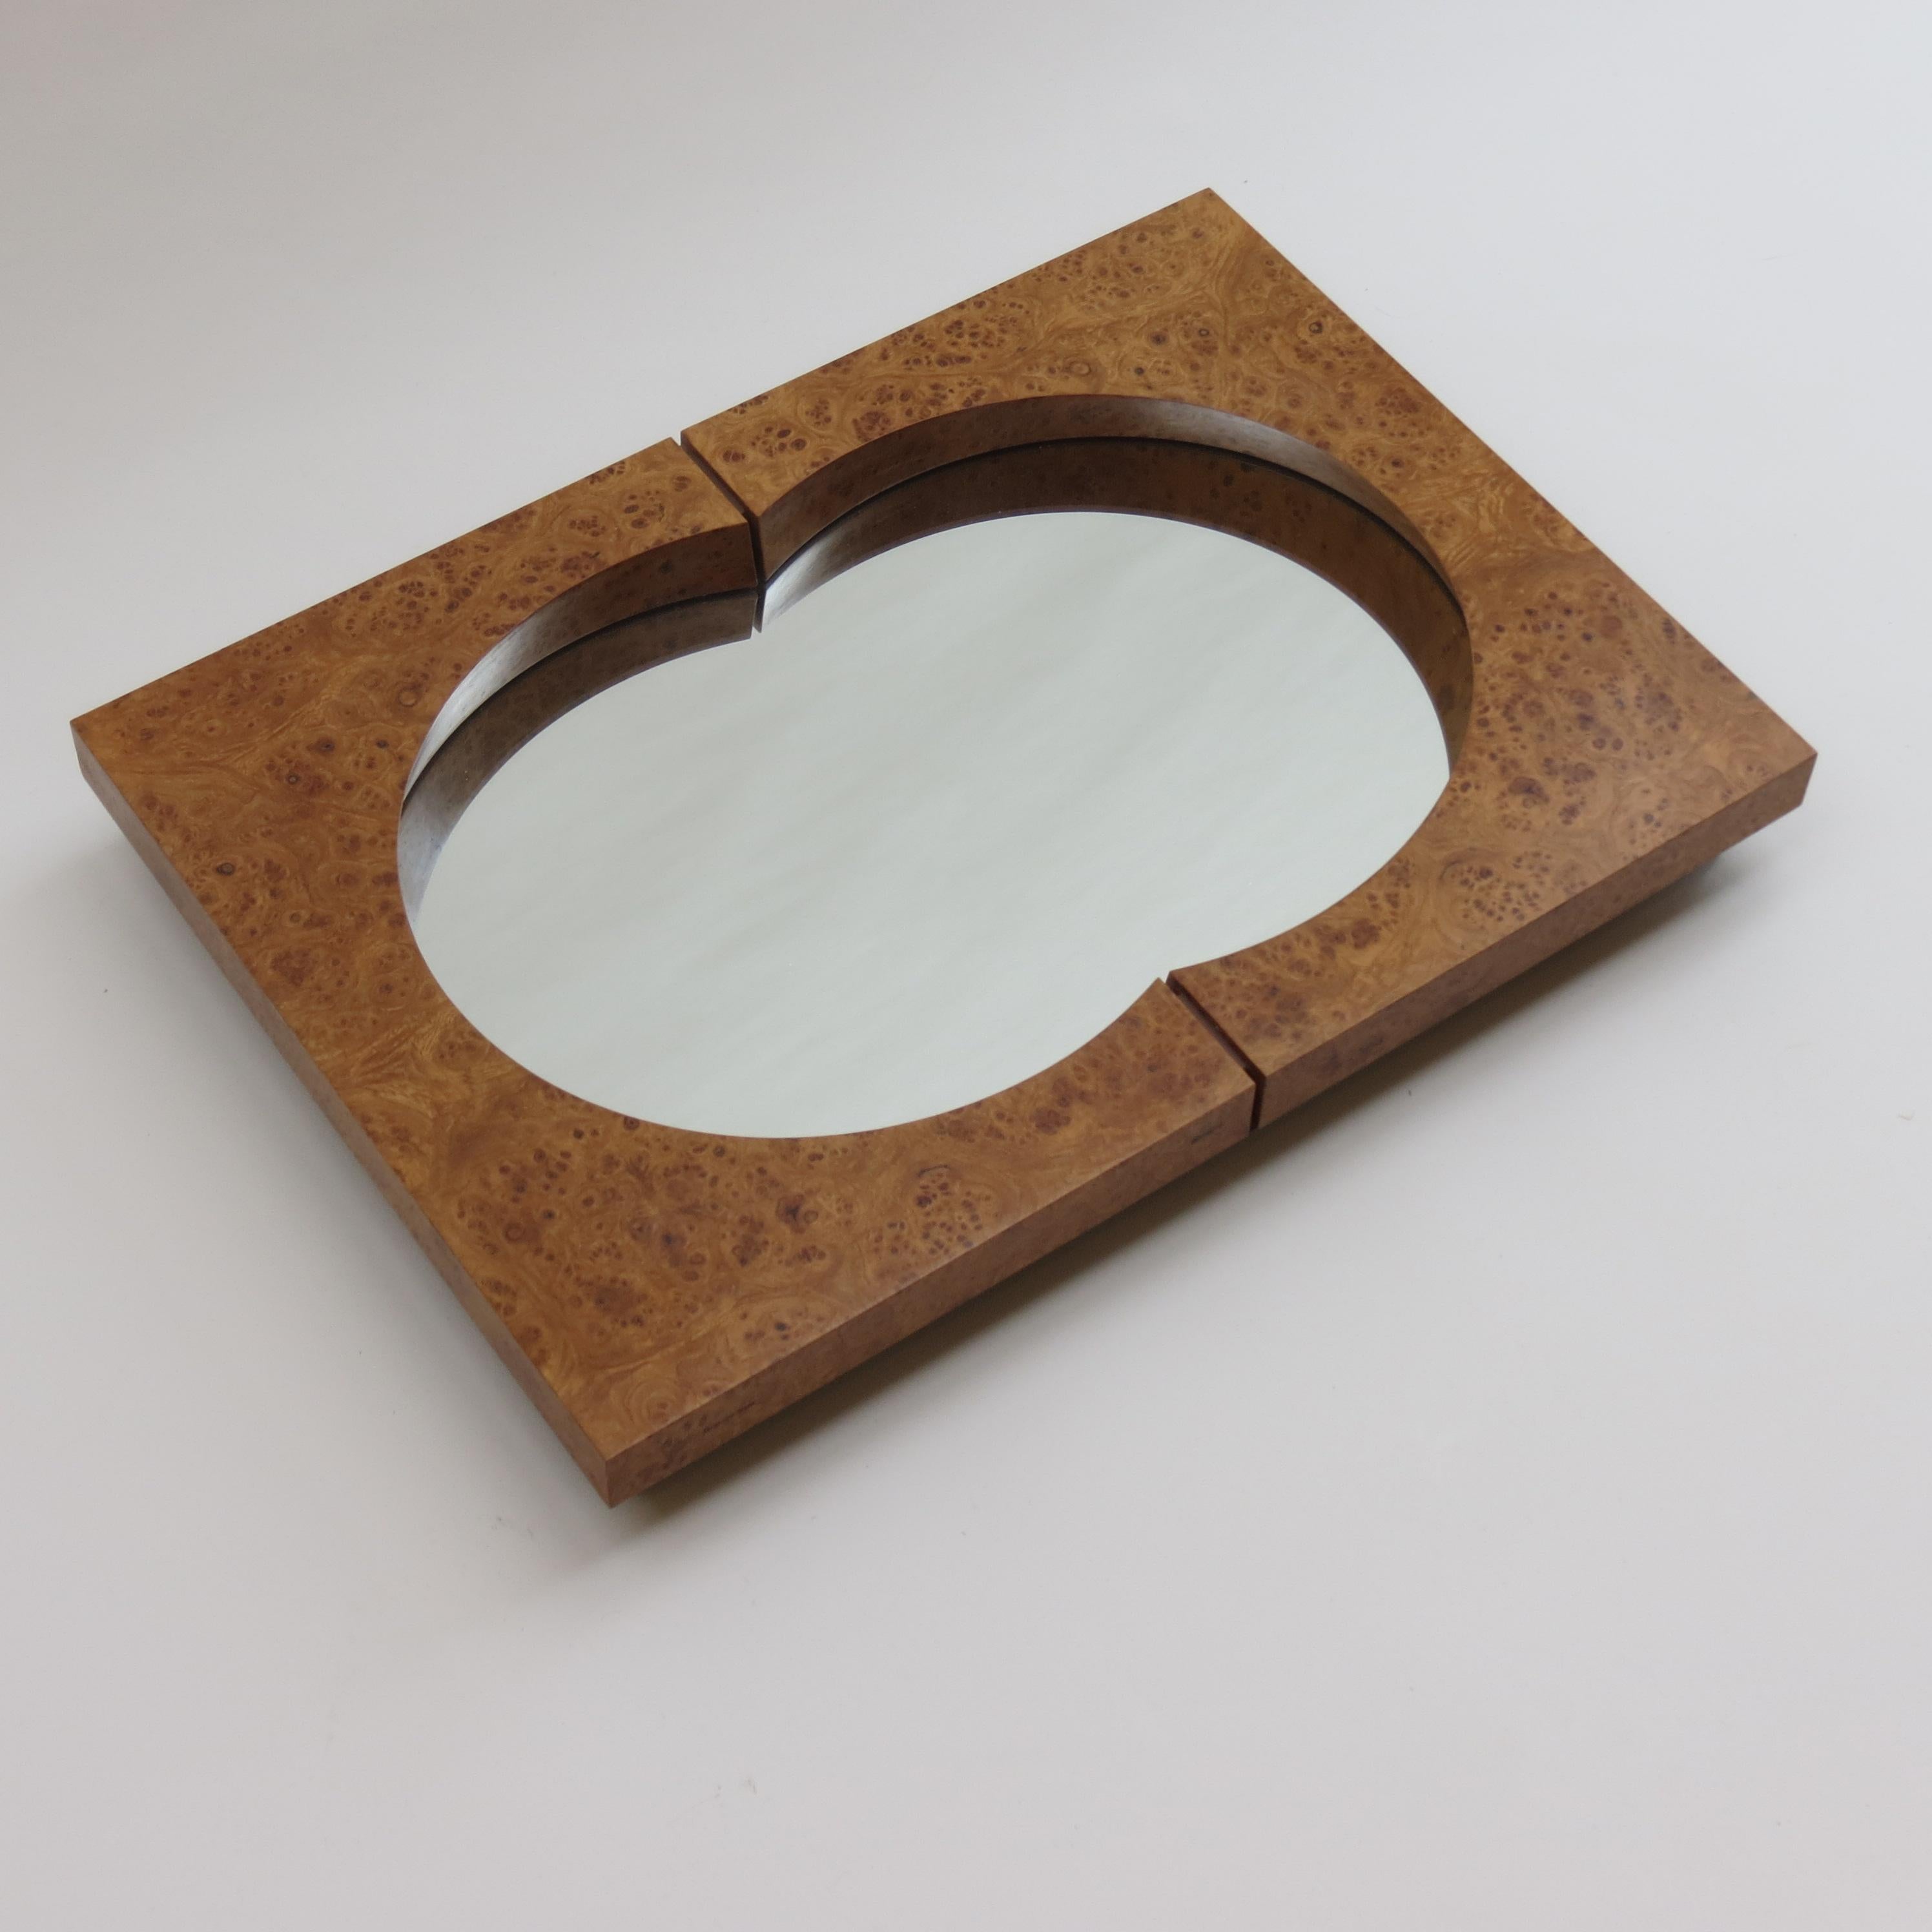 Wonderful mirror made from veneered burr elm, designed and hand produced by Desmond Ryan in the 1990s. Exceptional quality, very well made. Glass mirror plate.

In good condition. Stamped Desmond Ryan. 



 